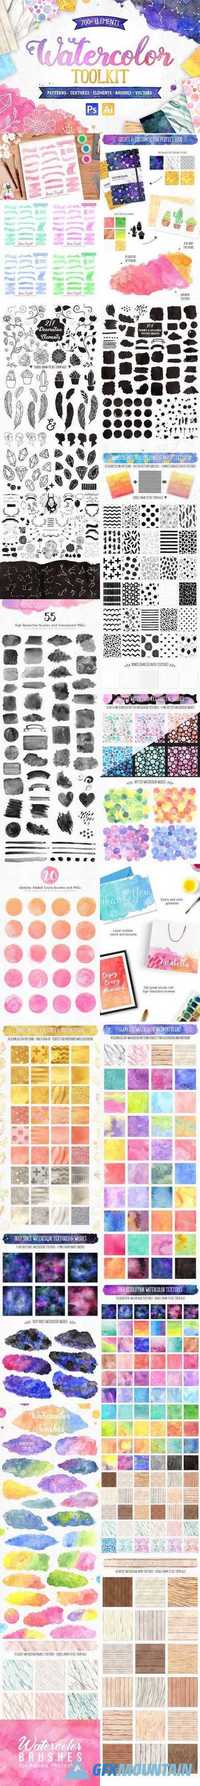 New Watercolor Texture Toolkit 1559646